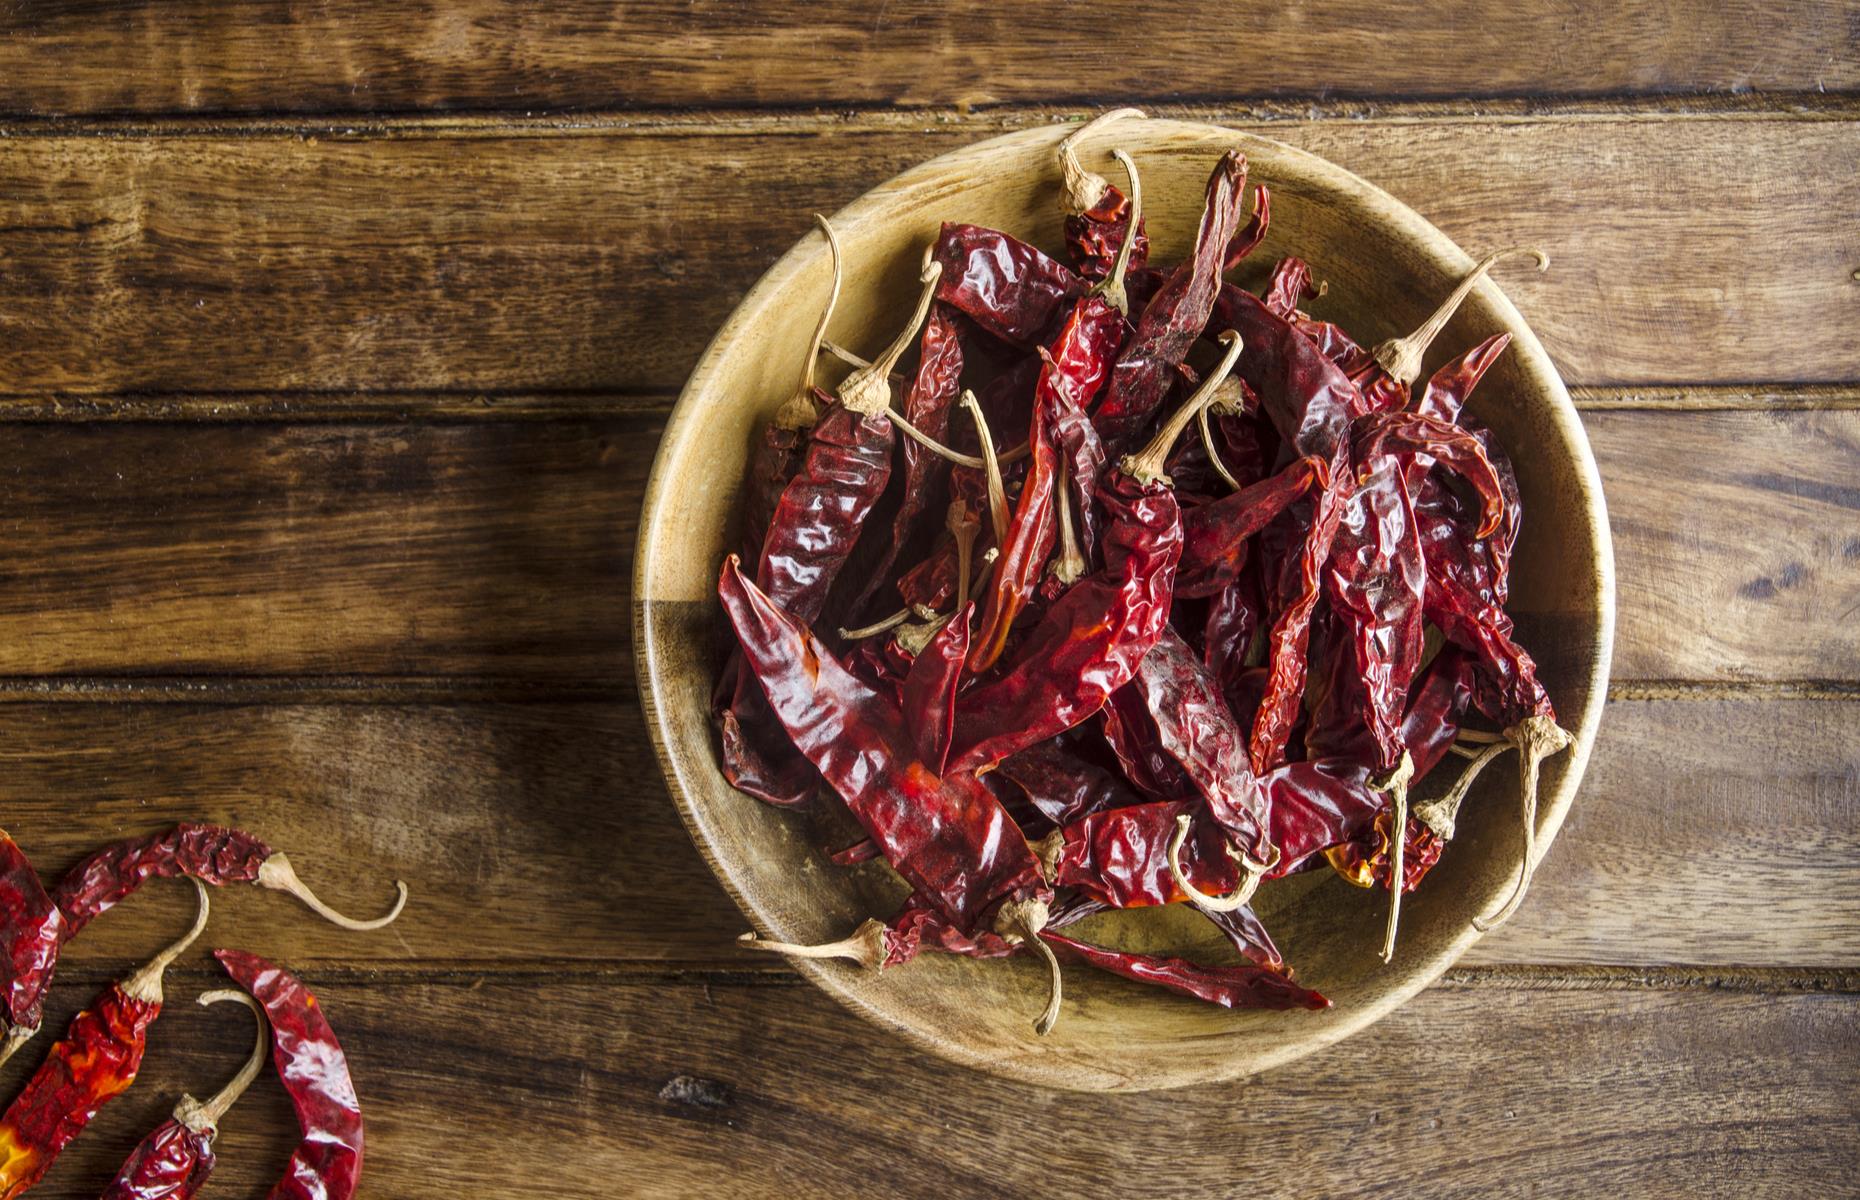 <p>If you're looking for a milder chili which adds a vibrant red color to dishes, then this Indian chili is the one. It's usually found dried or in powder form, and it is a key ingredient in <a href="https://www.lovefood.com/recipes/59633/tandoori-chicken-recipe">tandoori chicken</a>. It's used in our beef madras recipe – a creamy, rich, spicy curry which is quick to prepare but does need slow cooking on the hob.</p>  <p><strong><a href="https://www.lovefood.com/recipes/60440/anjum-anands-beef-madras">Get the recipe for beef madras here</a></strong></p>